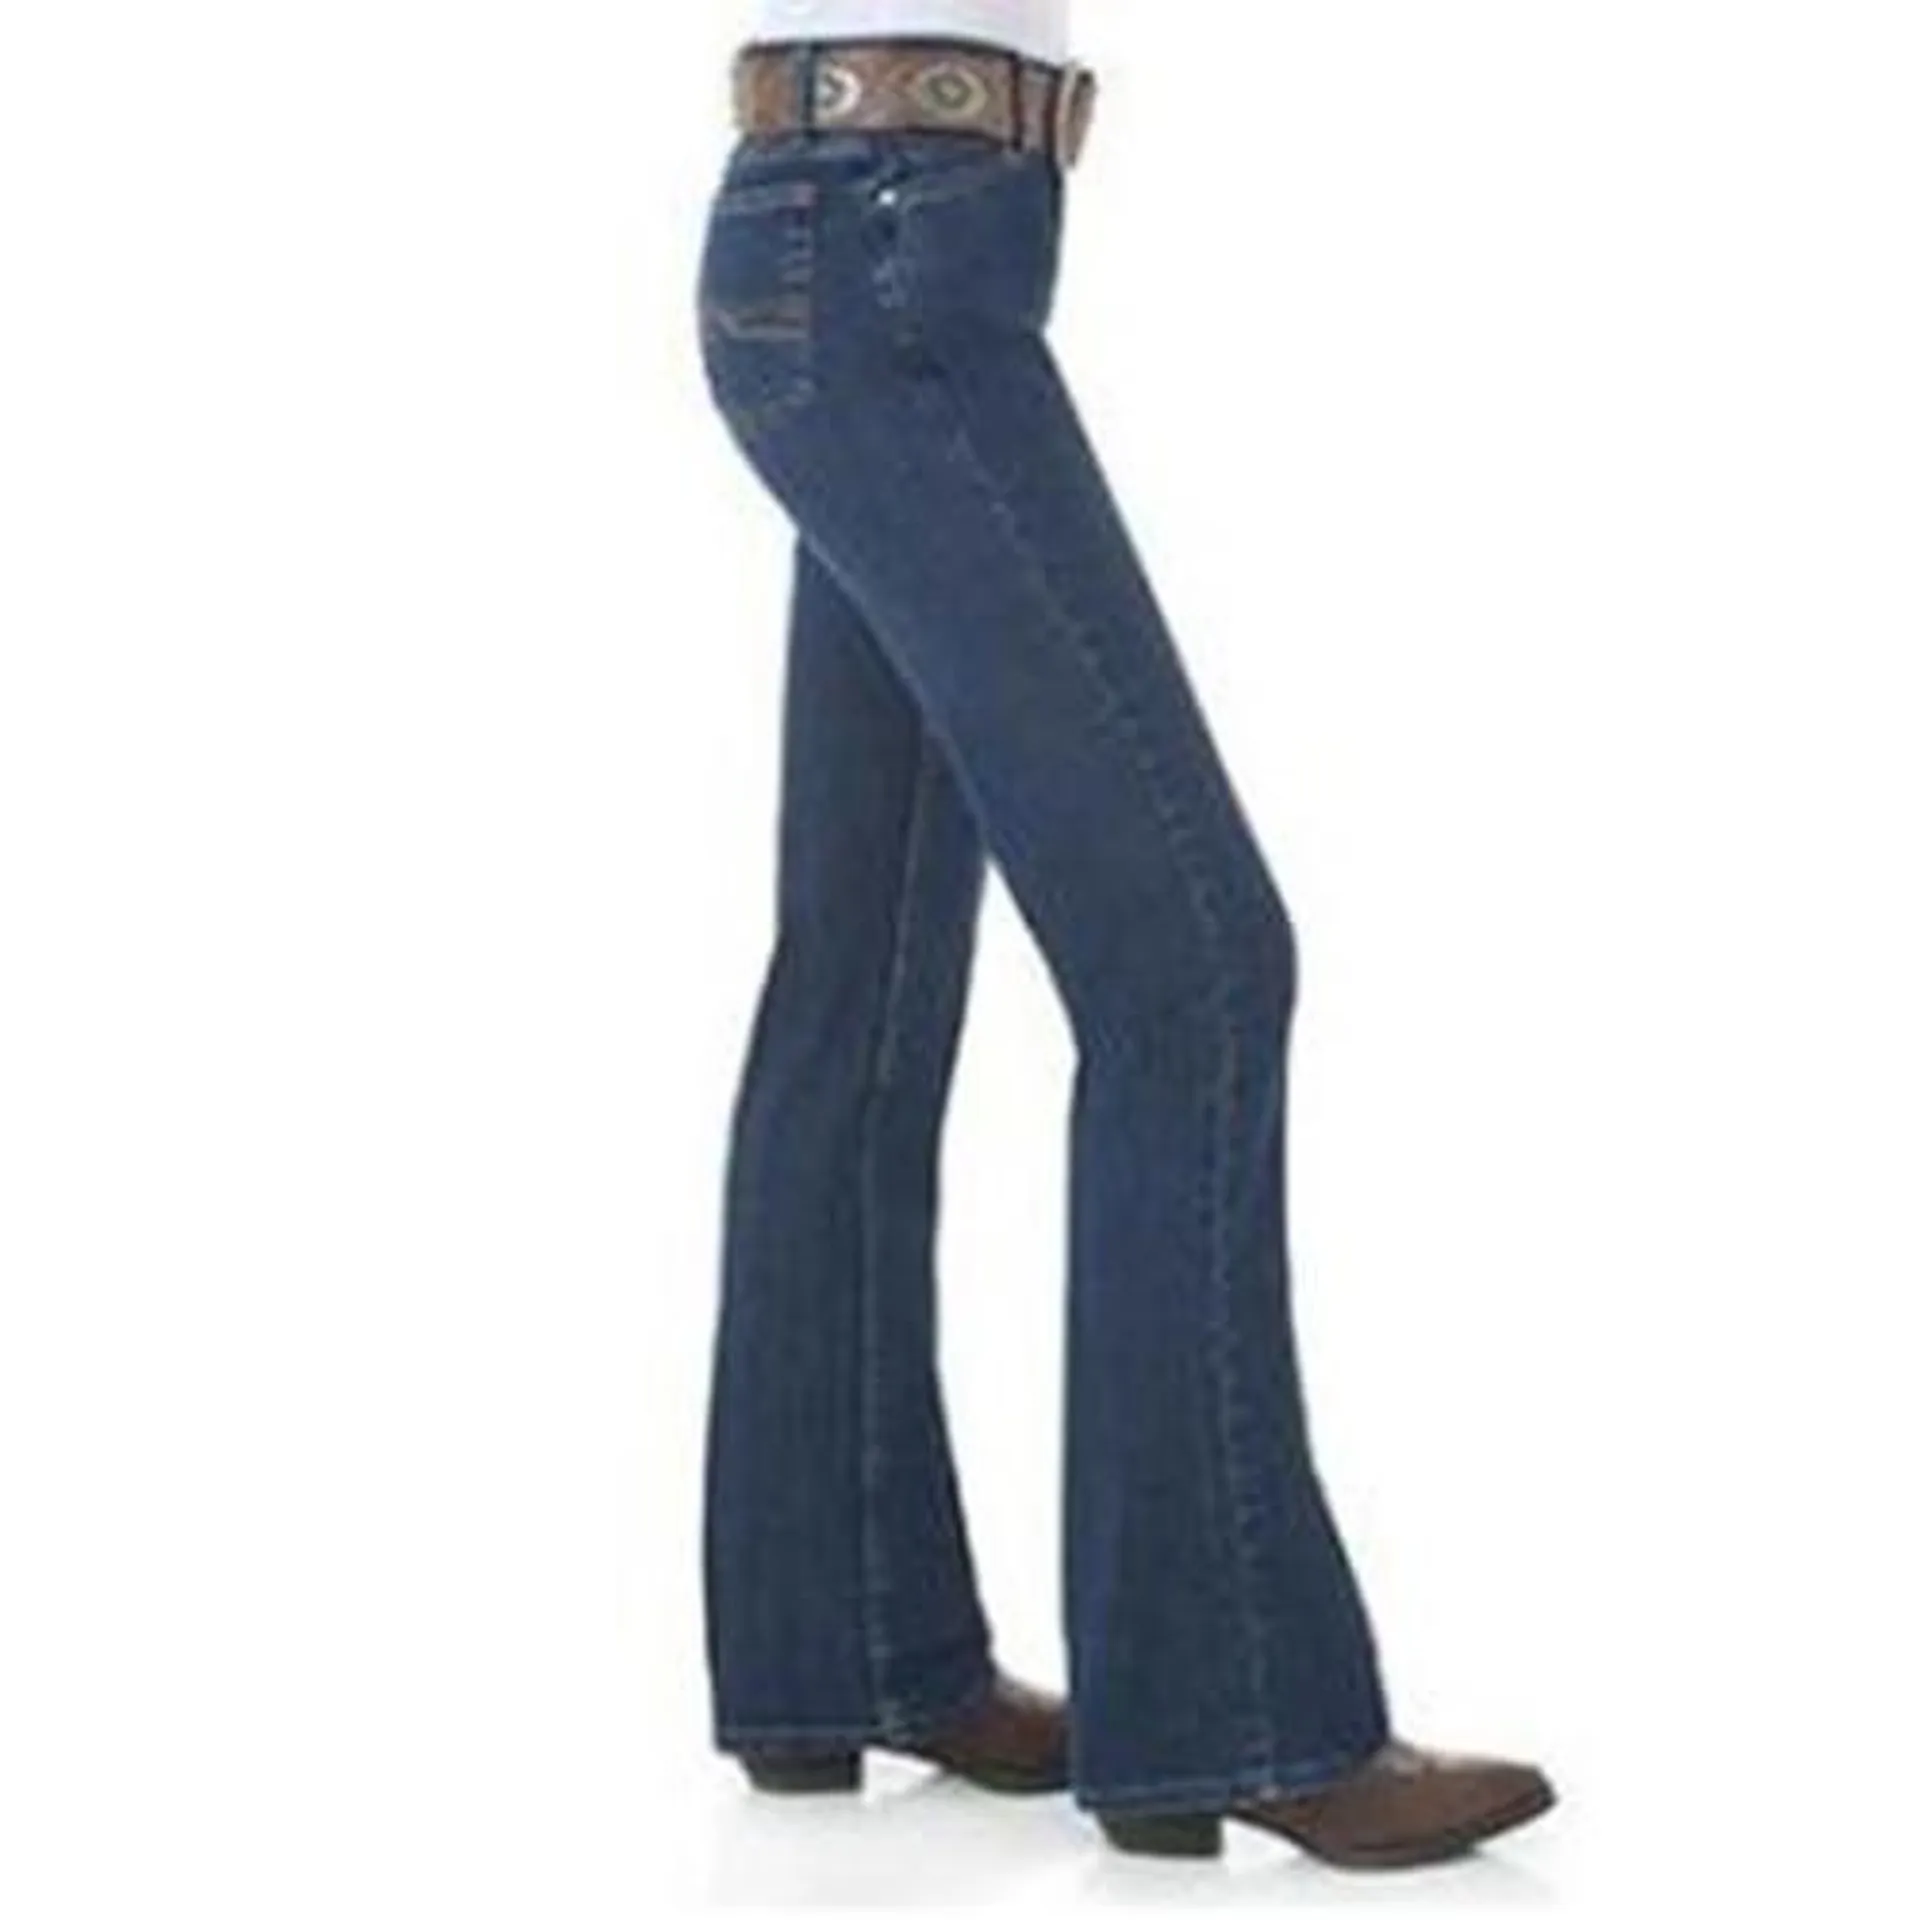 Wrangler - Misses As Real As Classic Fit Jeans - Denim